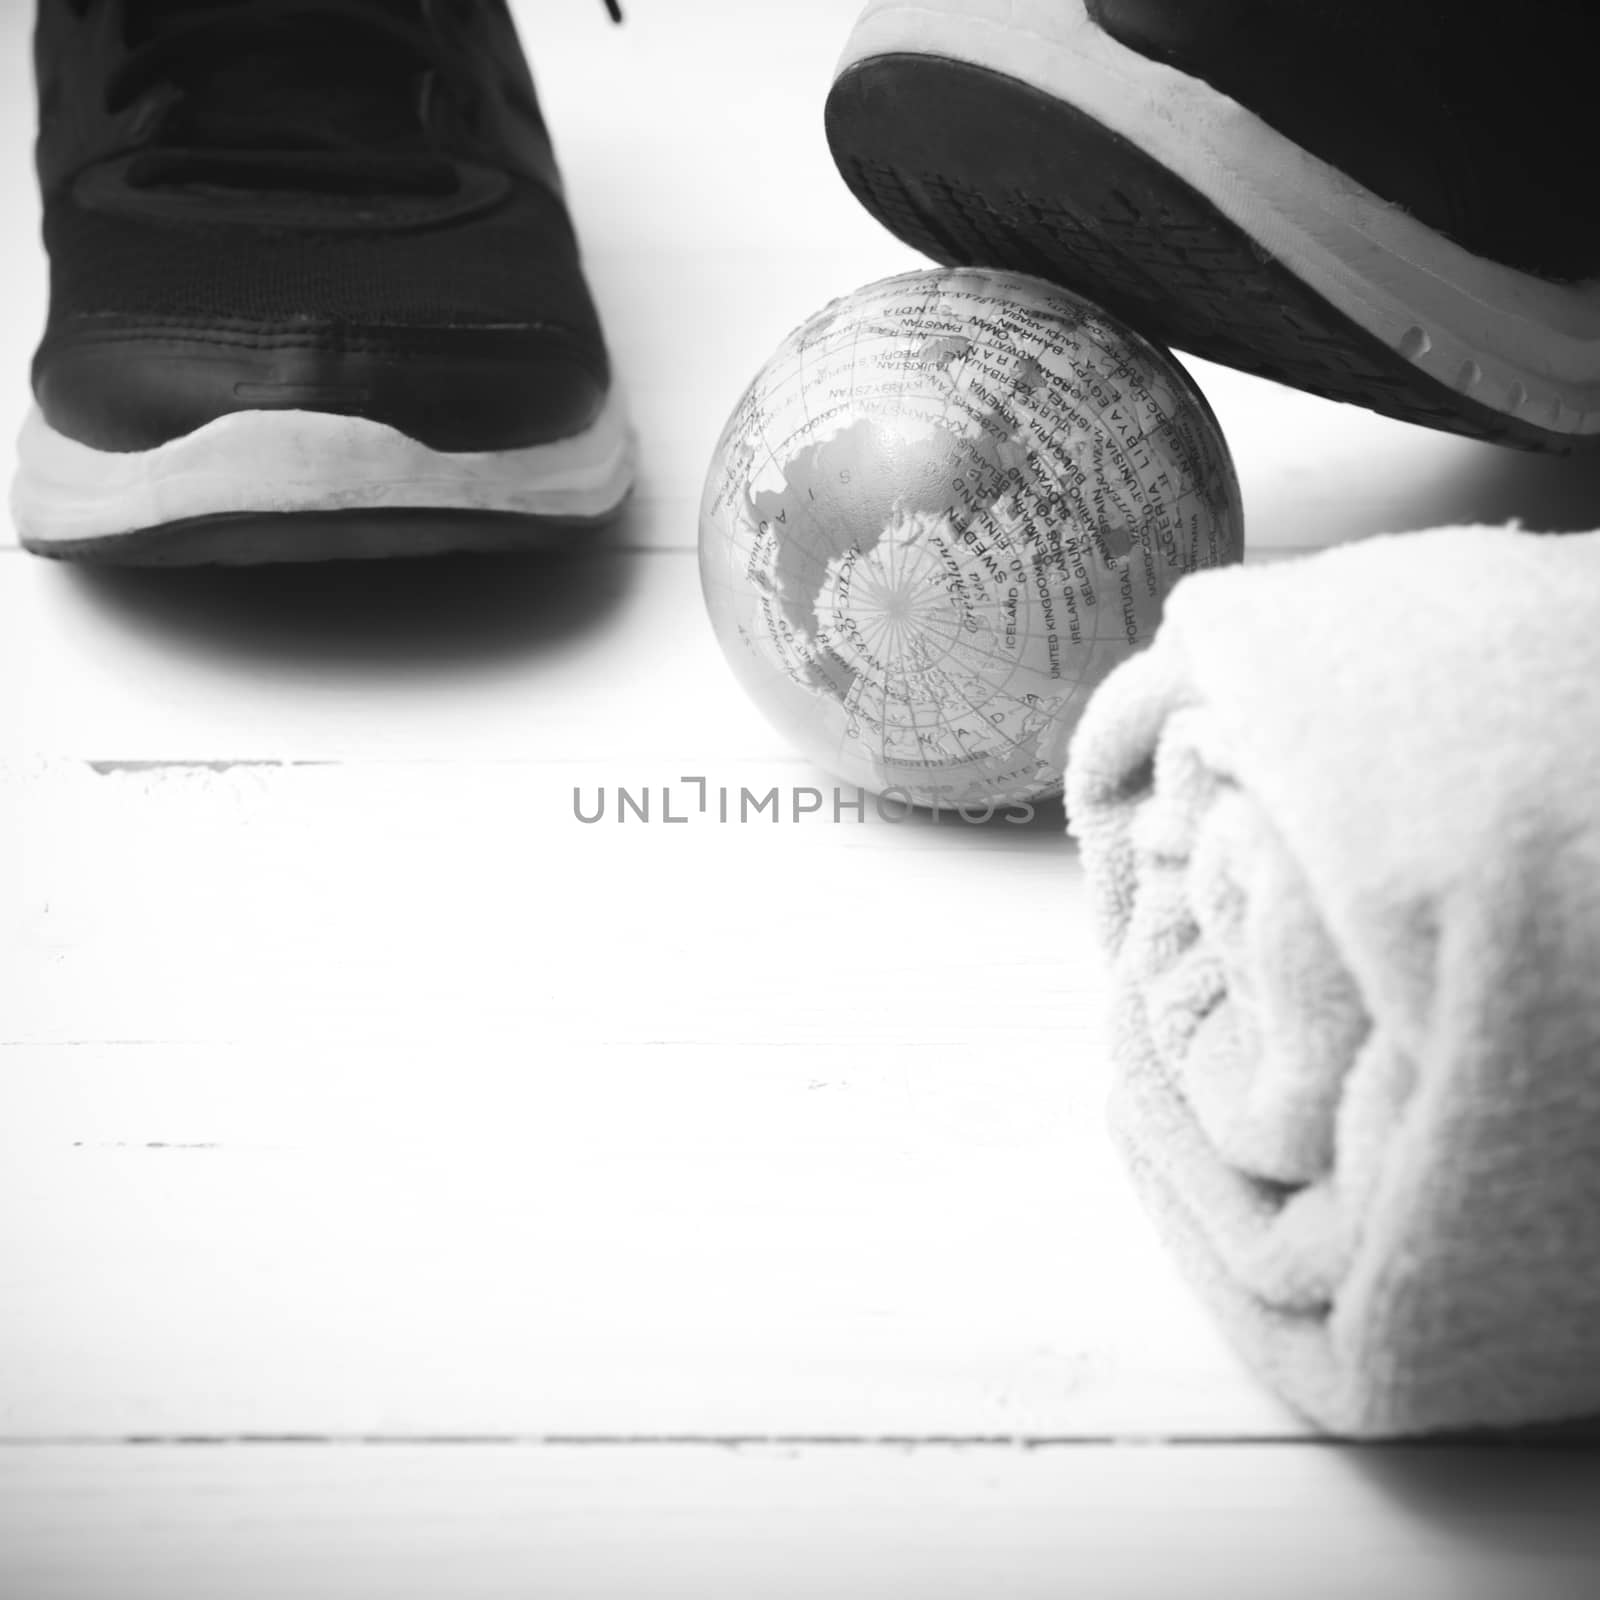 running shoes,earth ball and towel black and white tone color st by ammza12